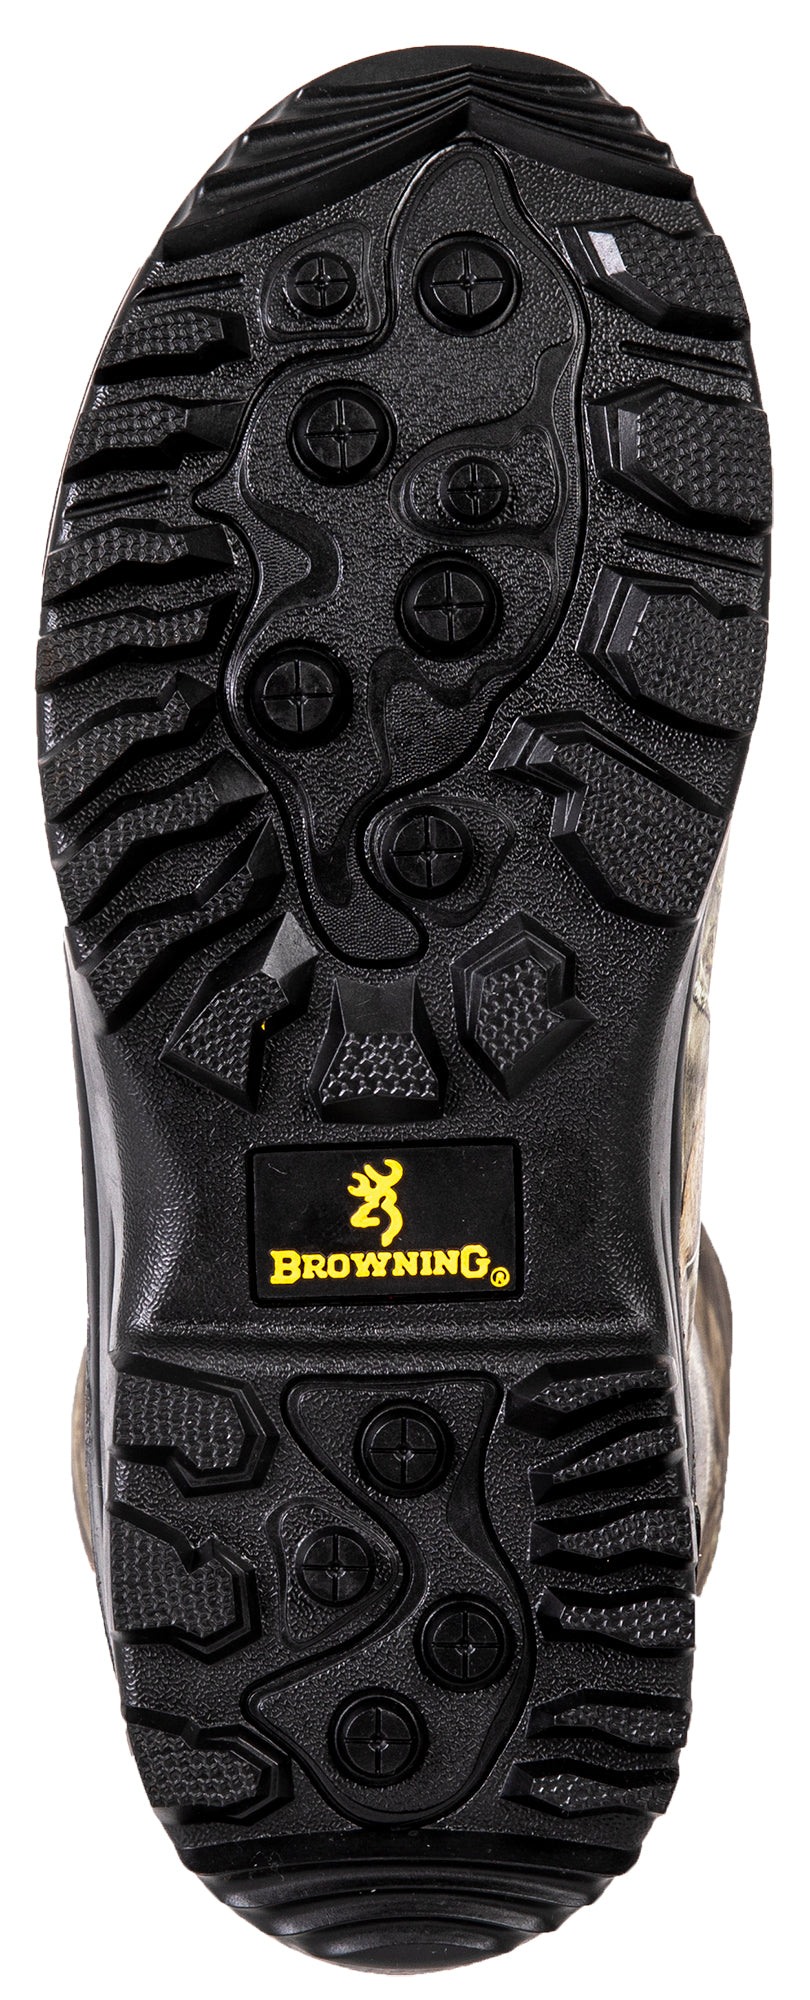 Browning "Invector Neo" men's hunting boots